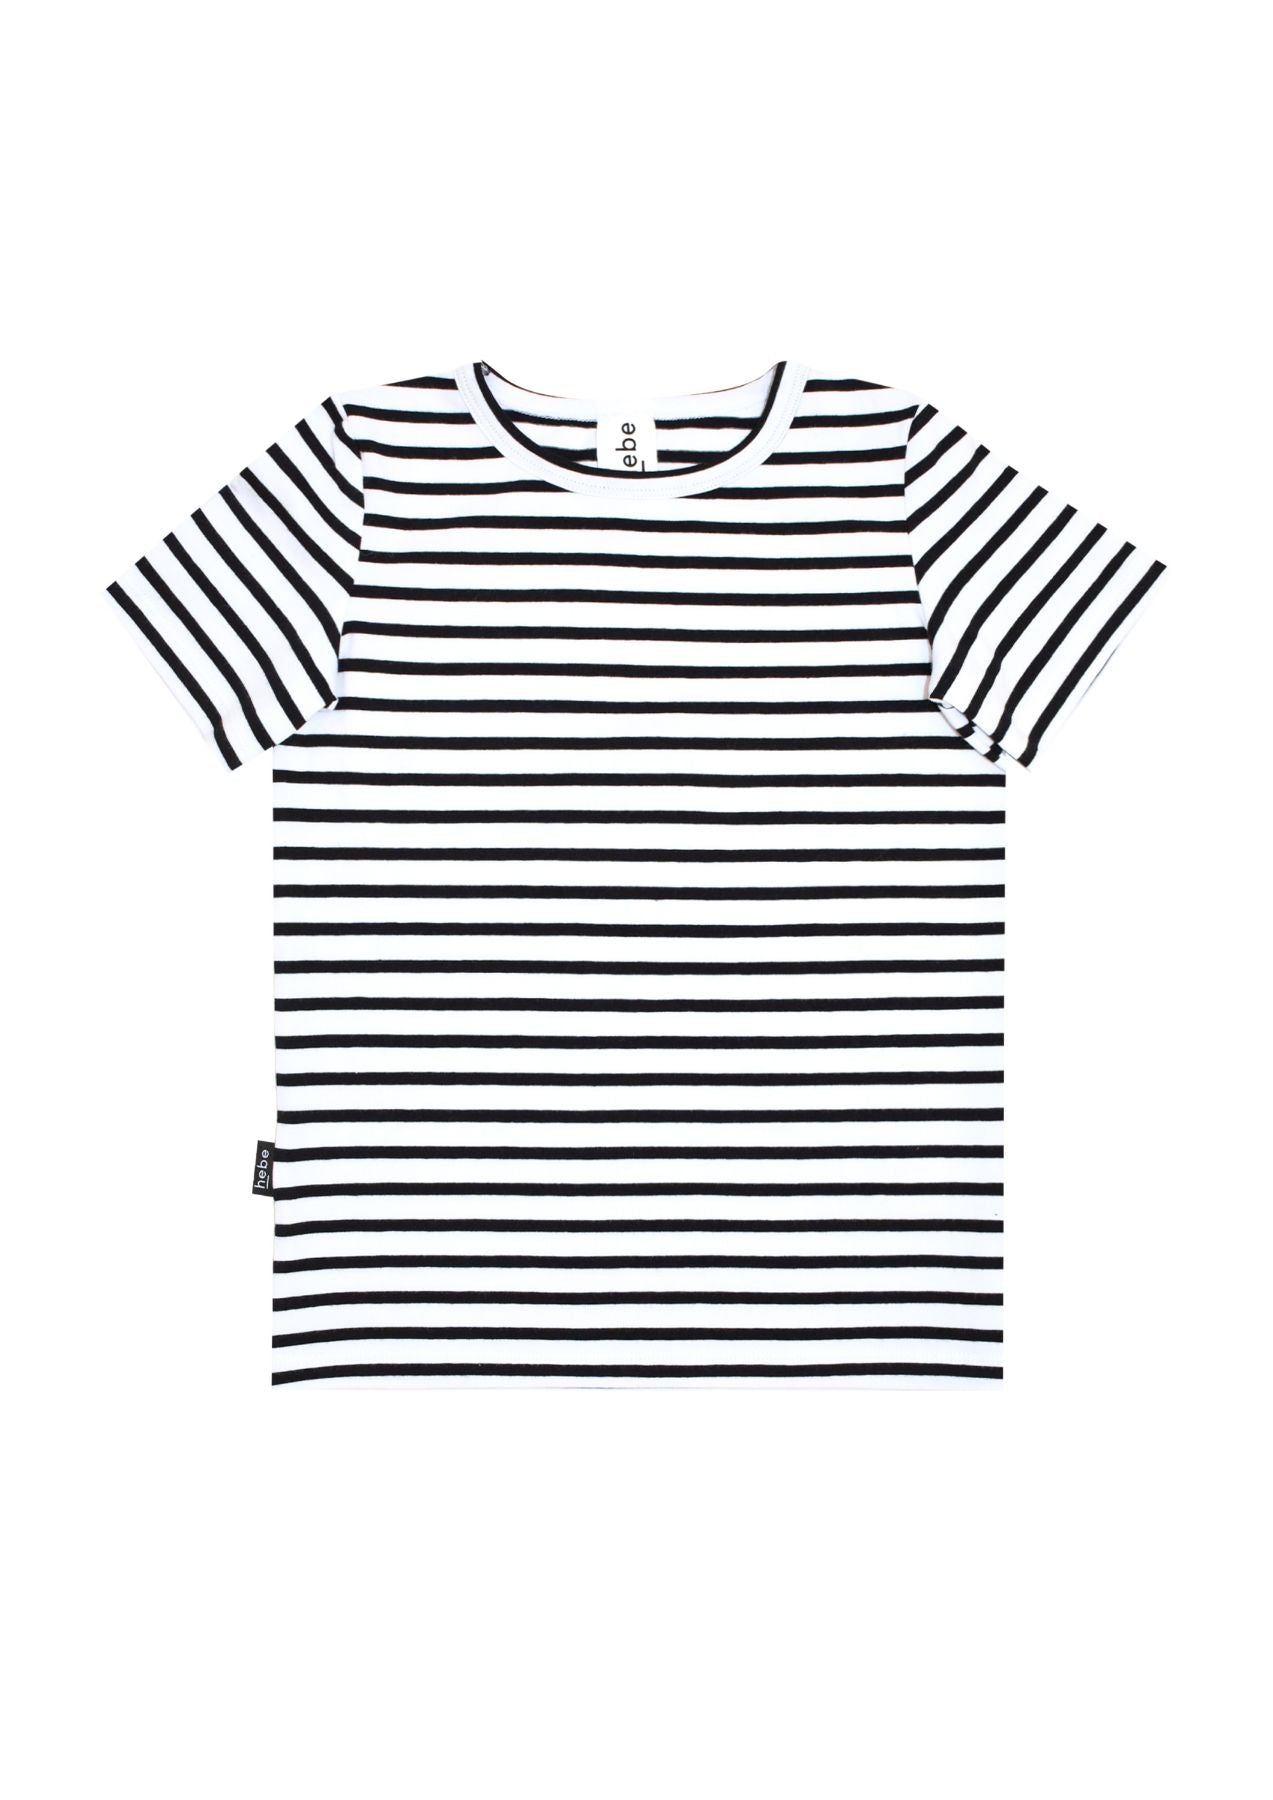 A breathable, organic cotton (GOTS) kid's T-shirt with black stripes is comfortable and stylish. Made from fabrics that are soft but durable, without harmful chemicals by Hebe. Match it with your Daddy for a special Daddy and Me day out. Perfect Father's Day gift. Sustainable kids clothing by MiliMilu in Hong Kong.